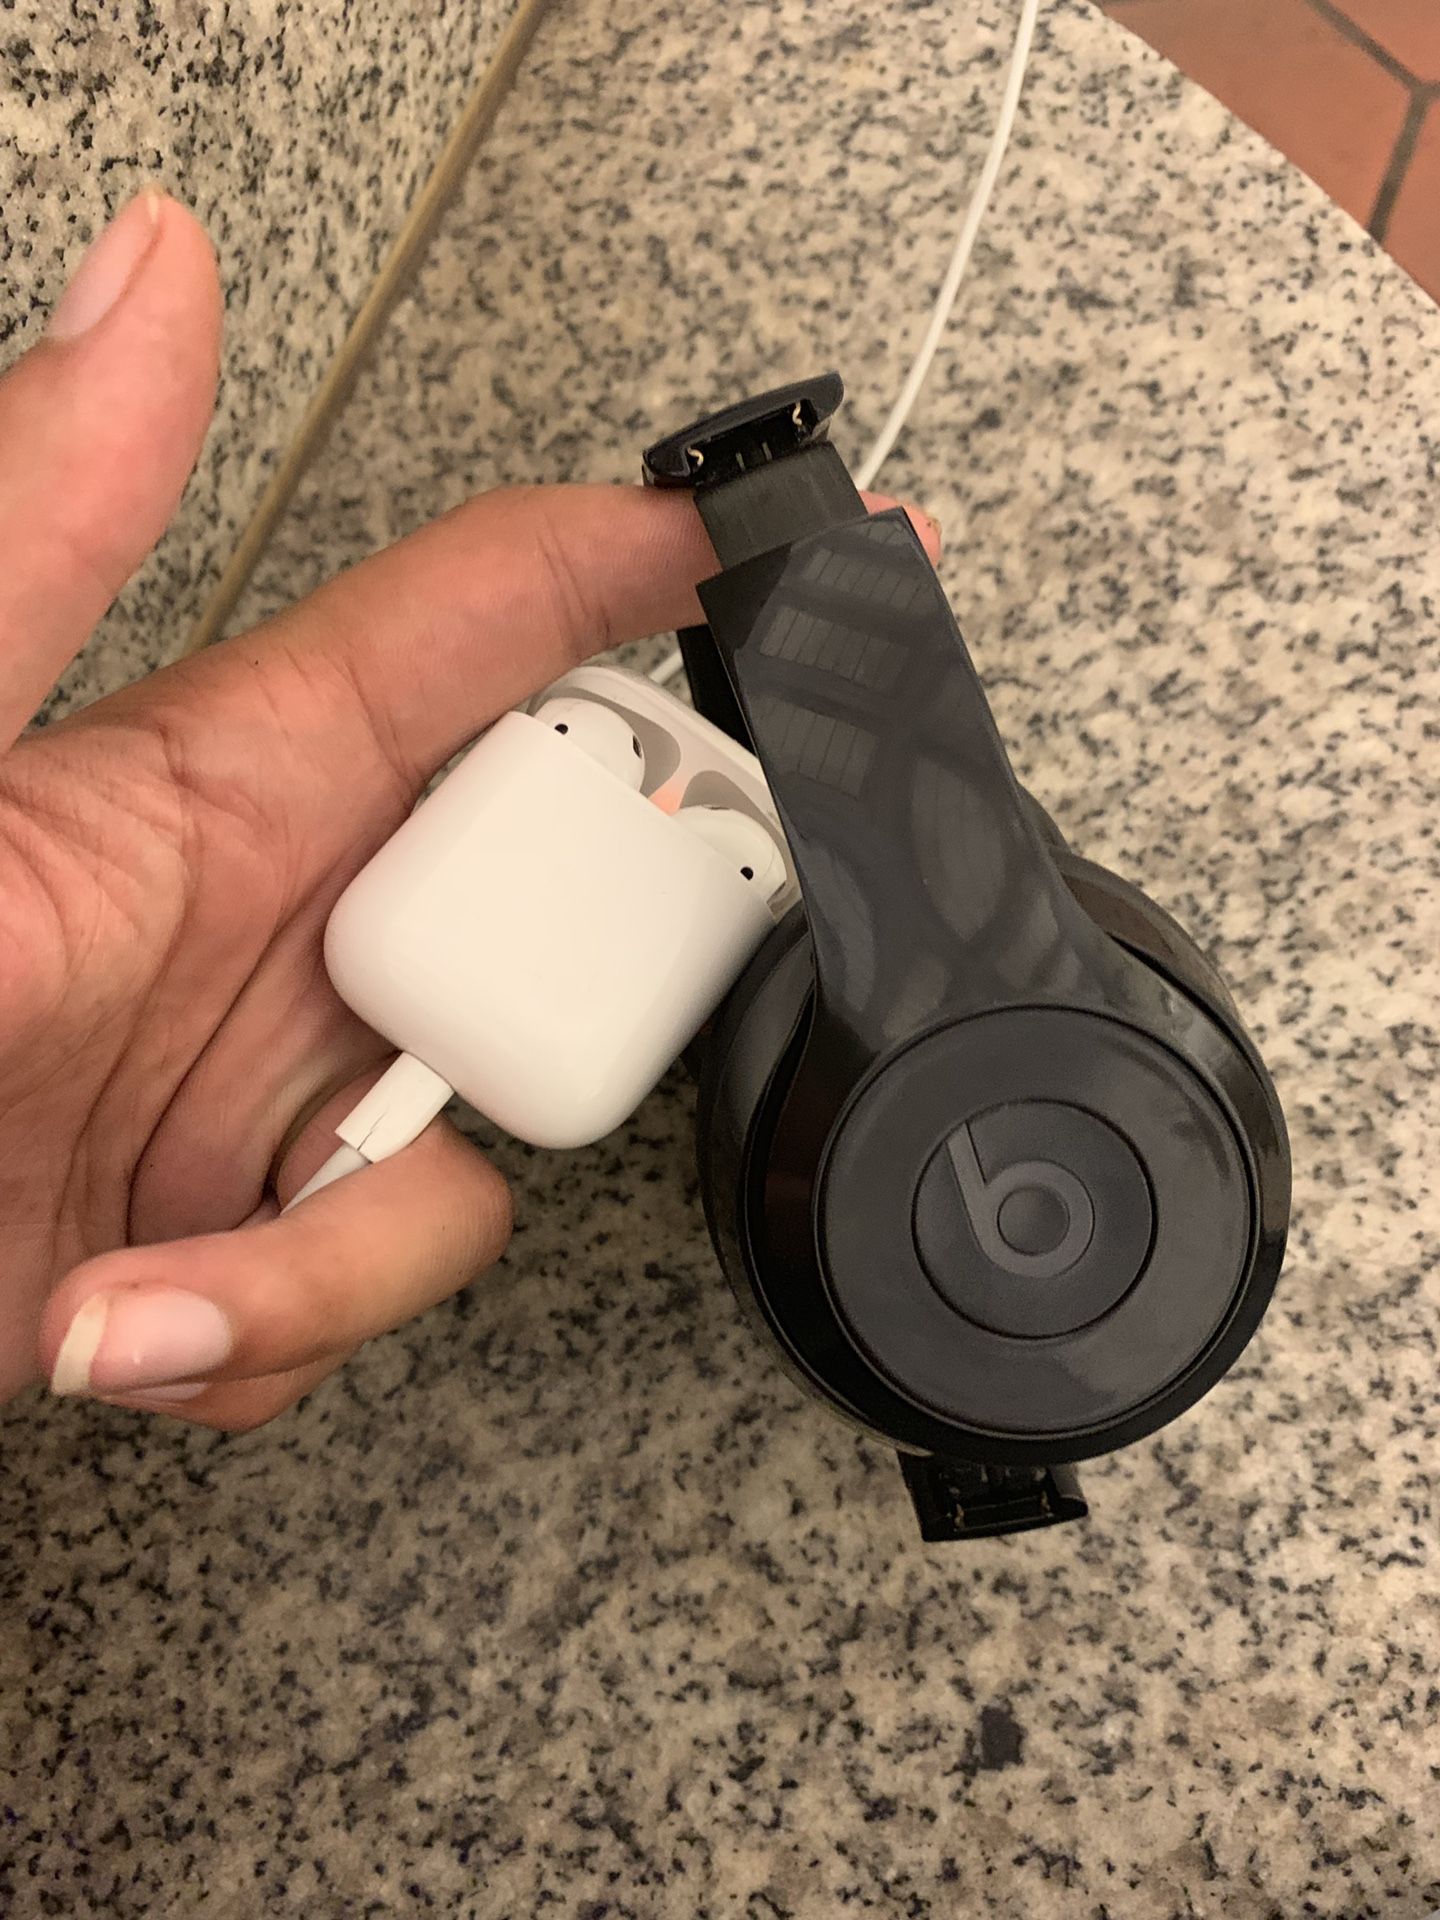 Apple AirPods and beats Solo 3 wireless headphones